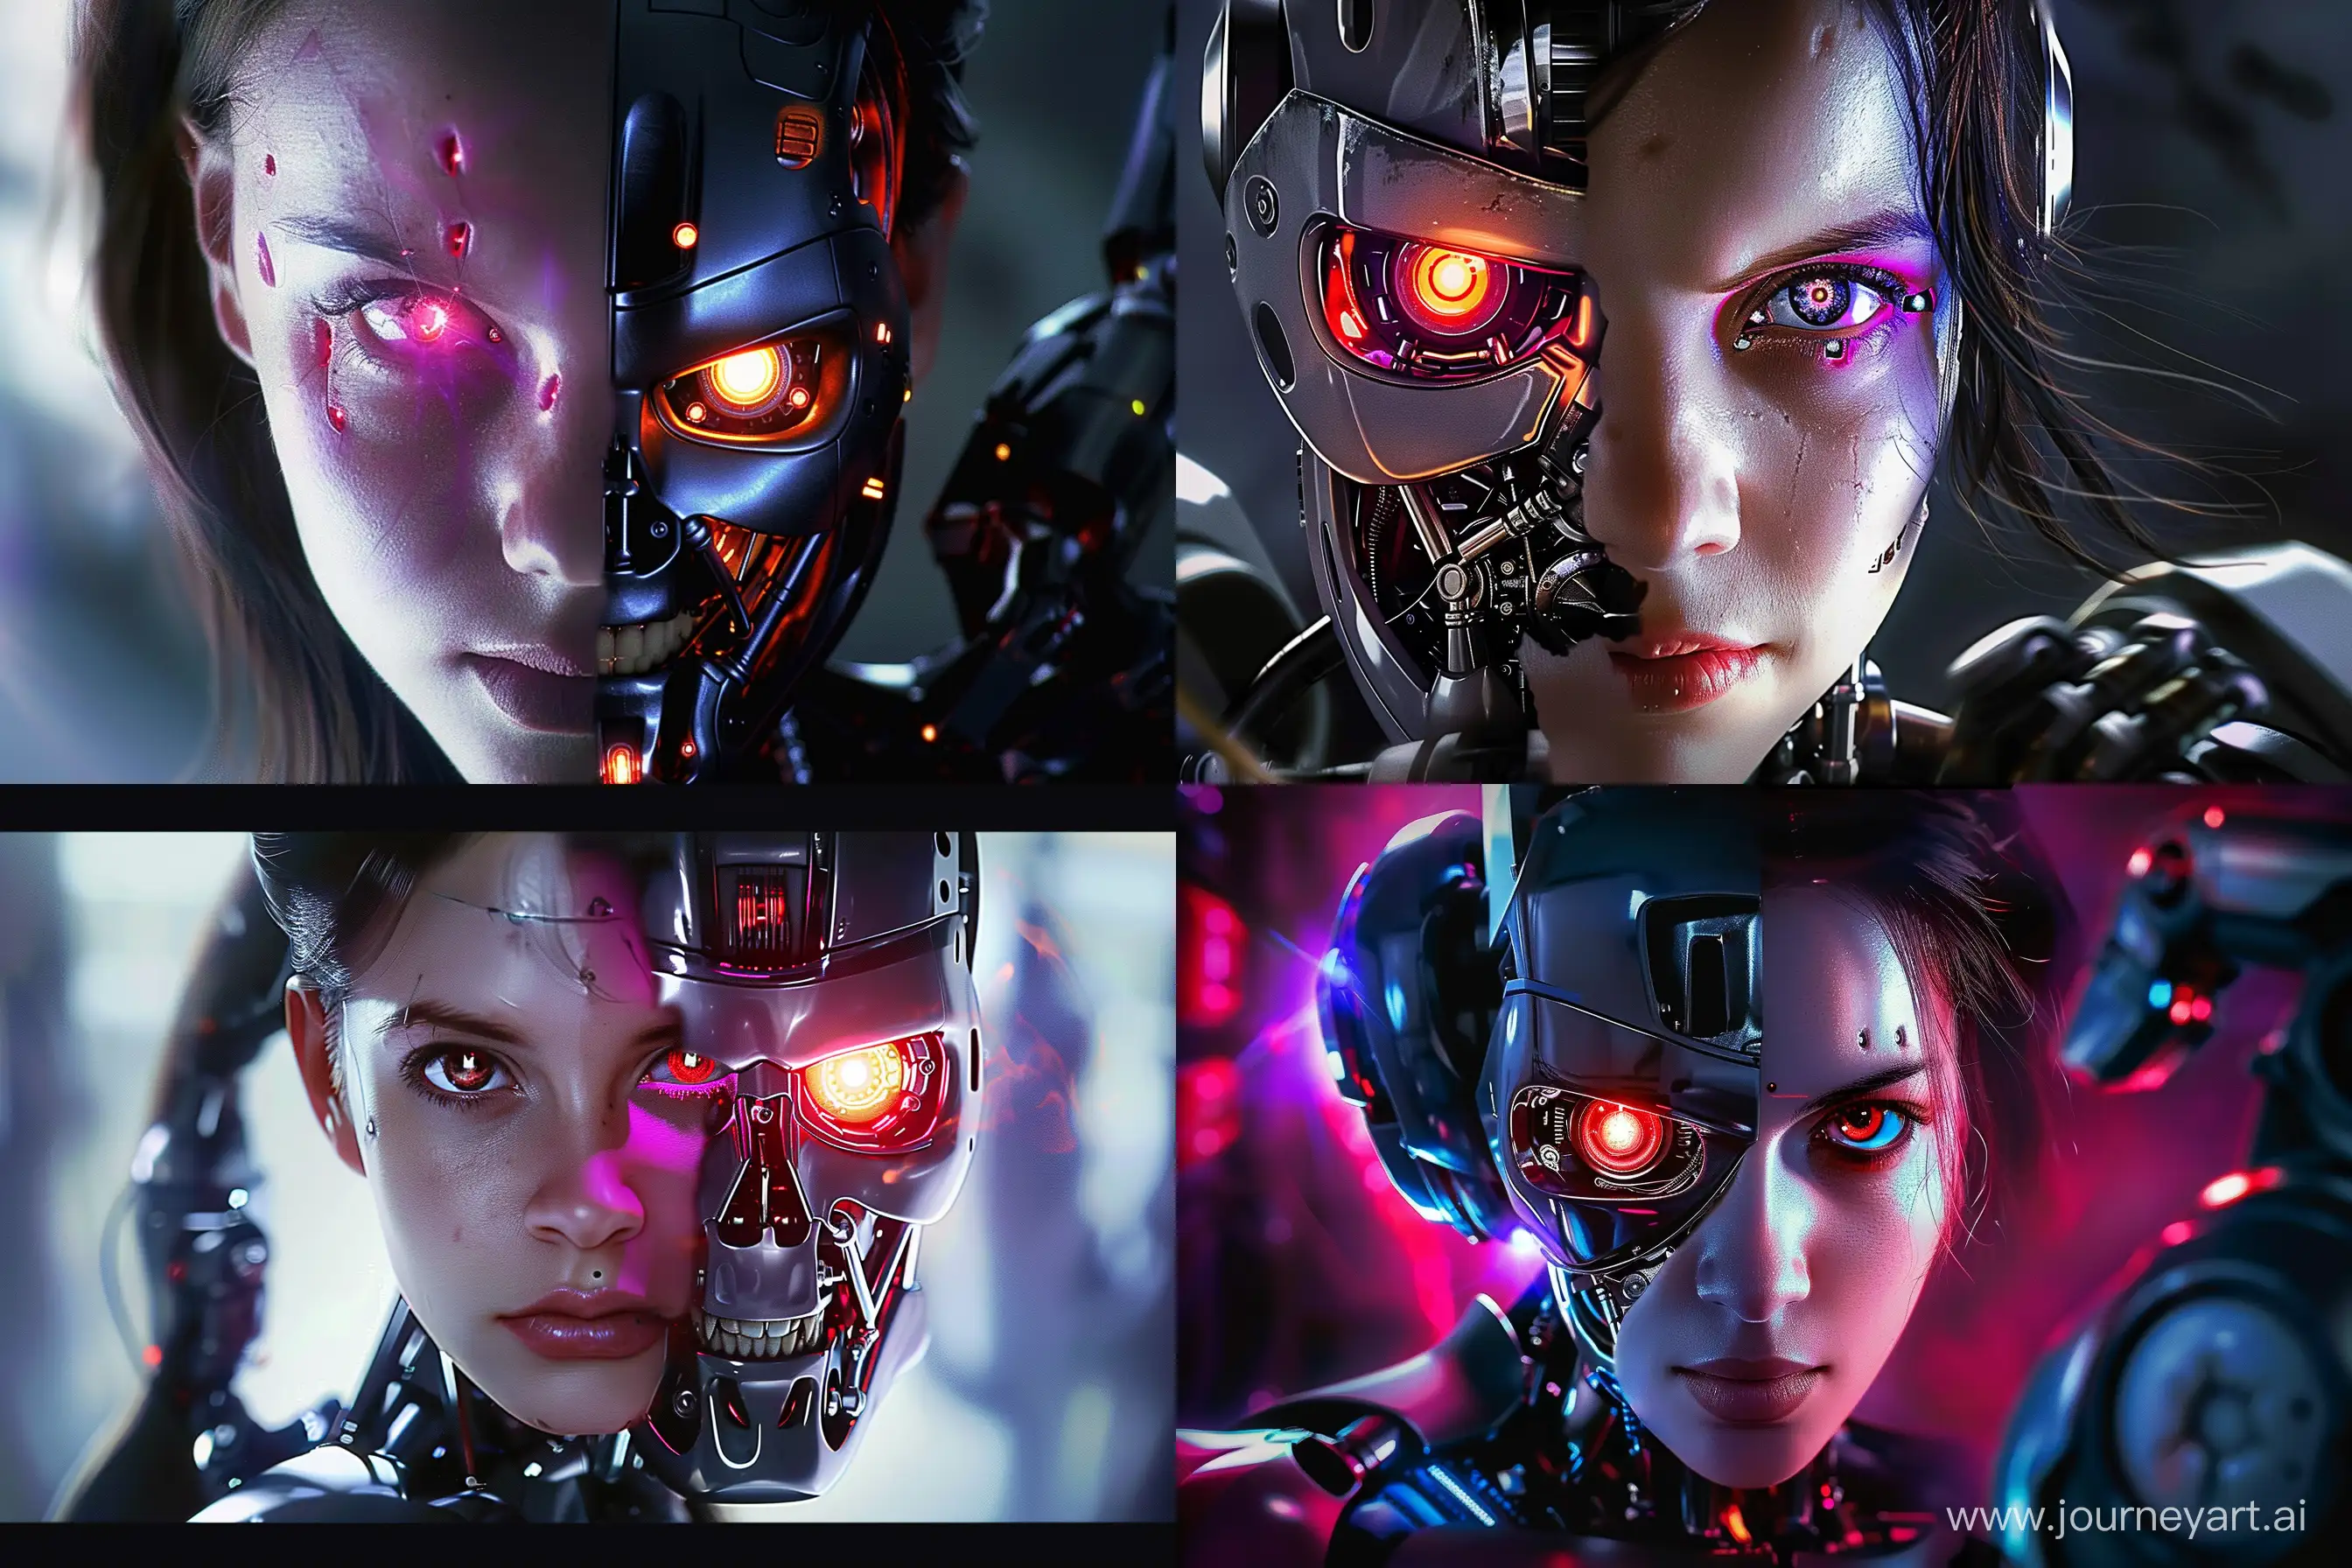 Cyborg-Girl-with-Robotic-Implants-and-Burning-Red-Eye